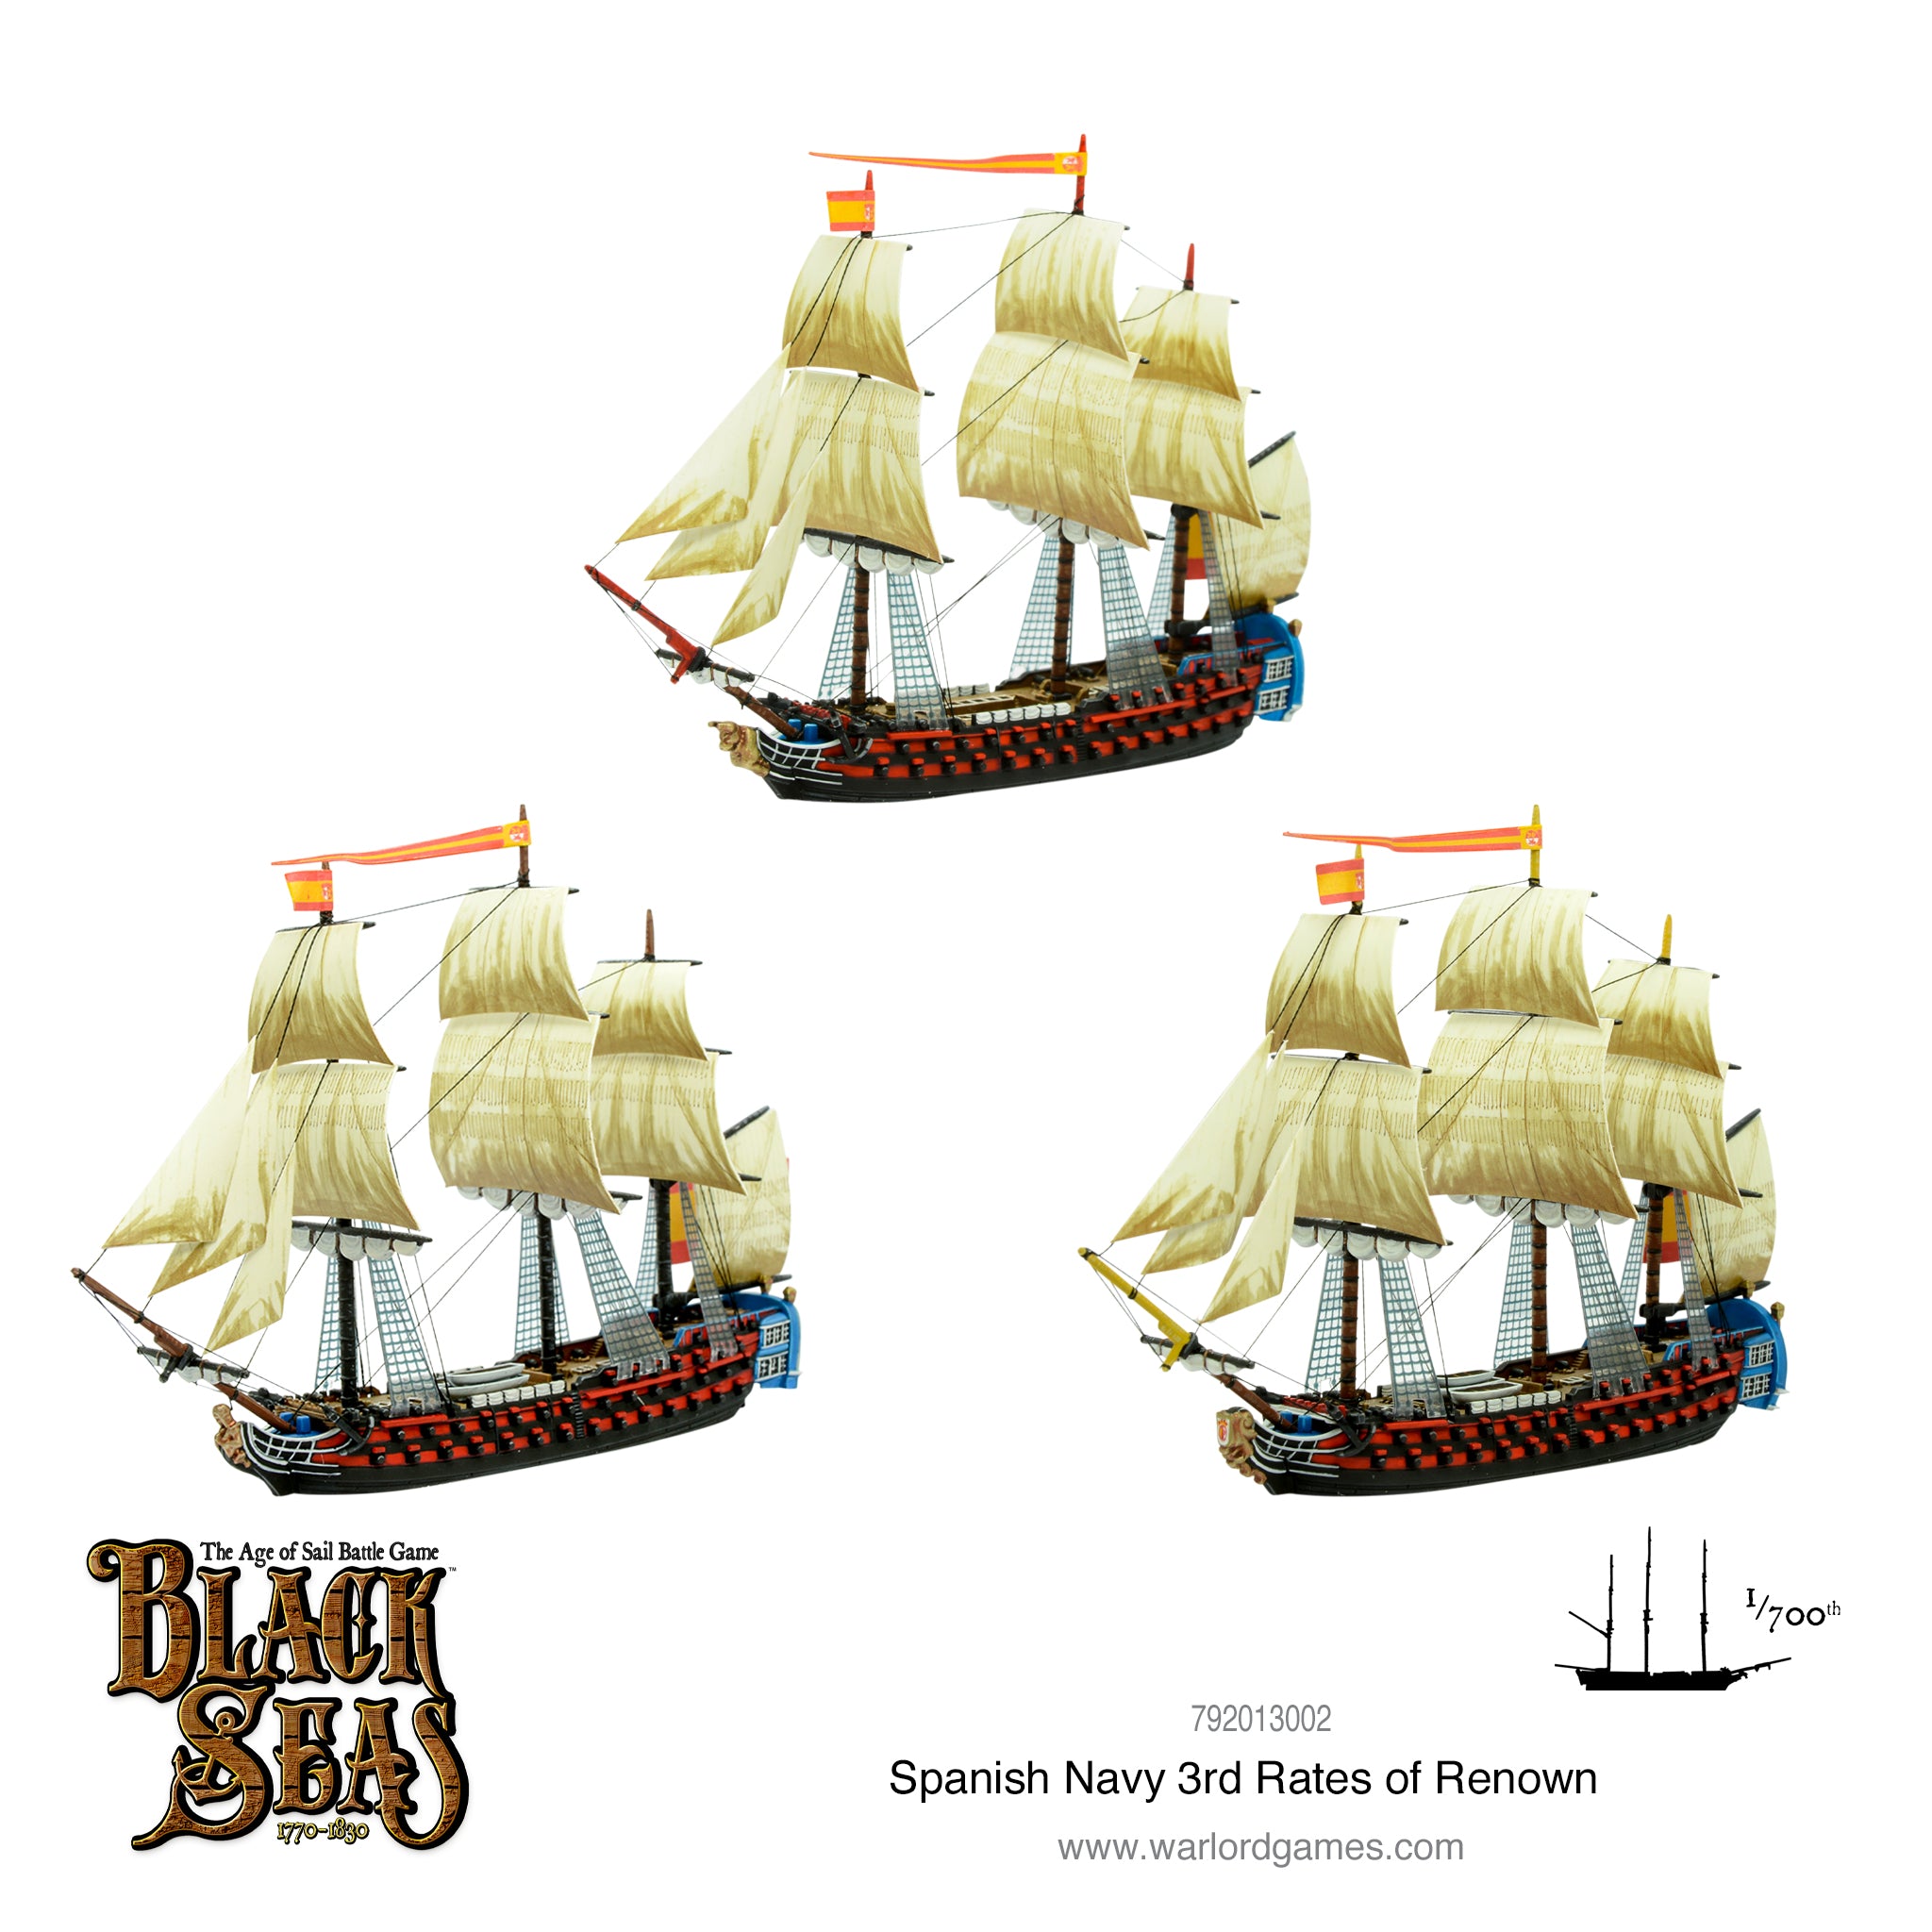 Spanish Navy 3rd Rates of Renown